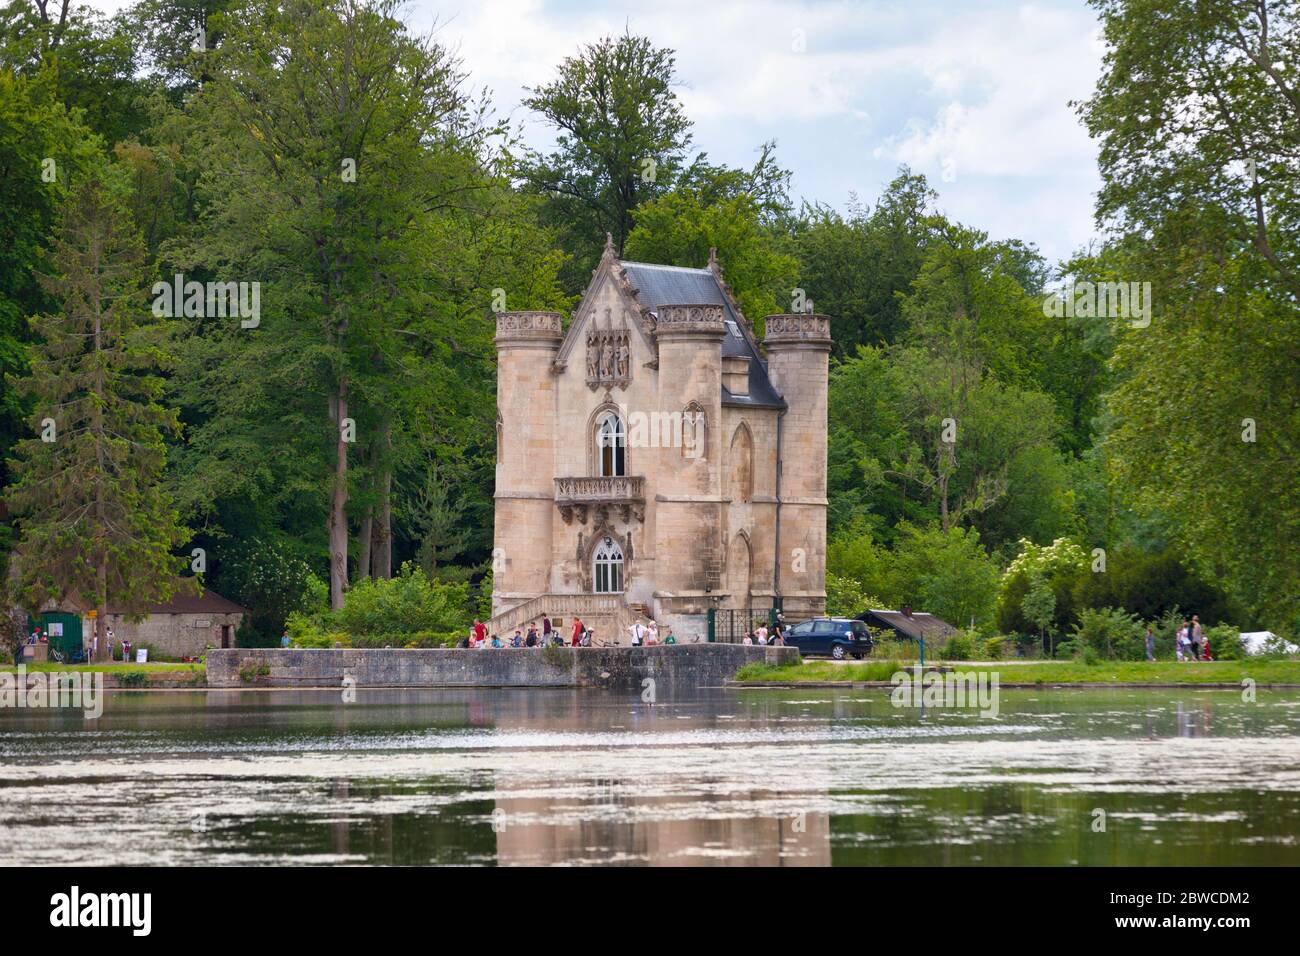 Coye-la-Forêt, France - May 22 2020: The Etangs de Commelles are located in the communes of Orry-la-Ville and Coye-la-Forêt in the south of Oise. Stock Photo